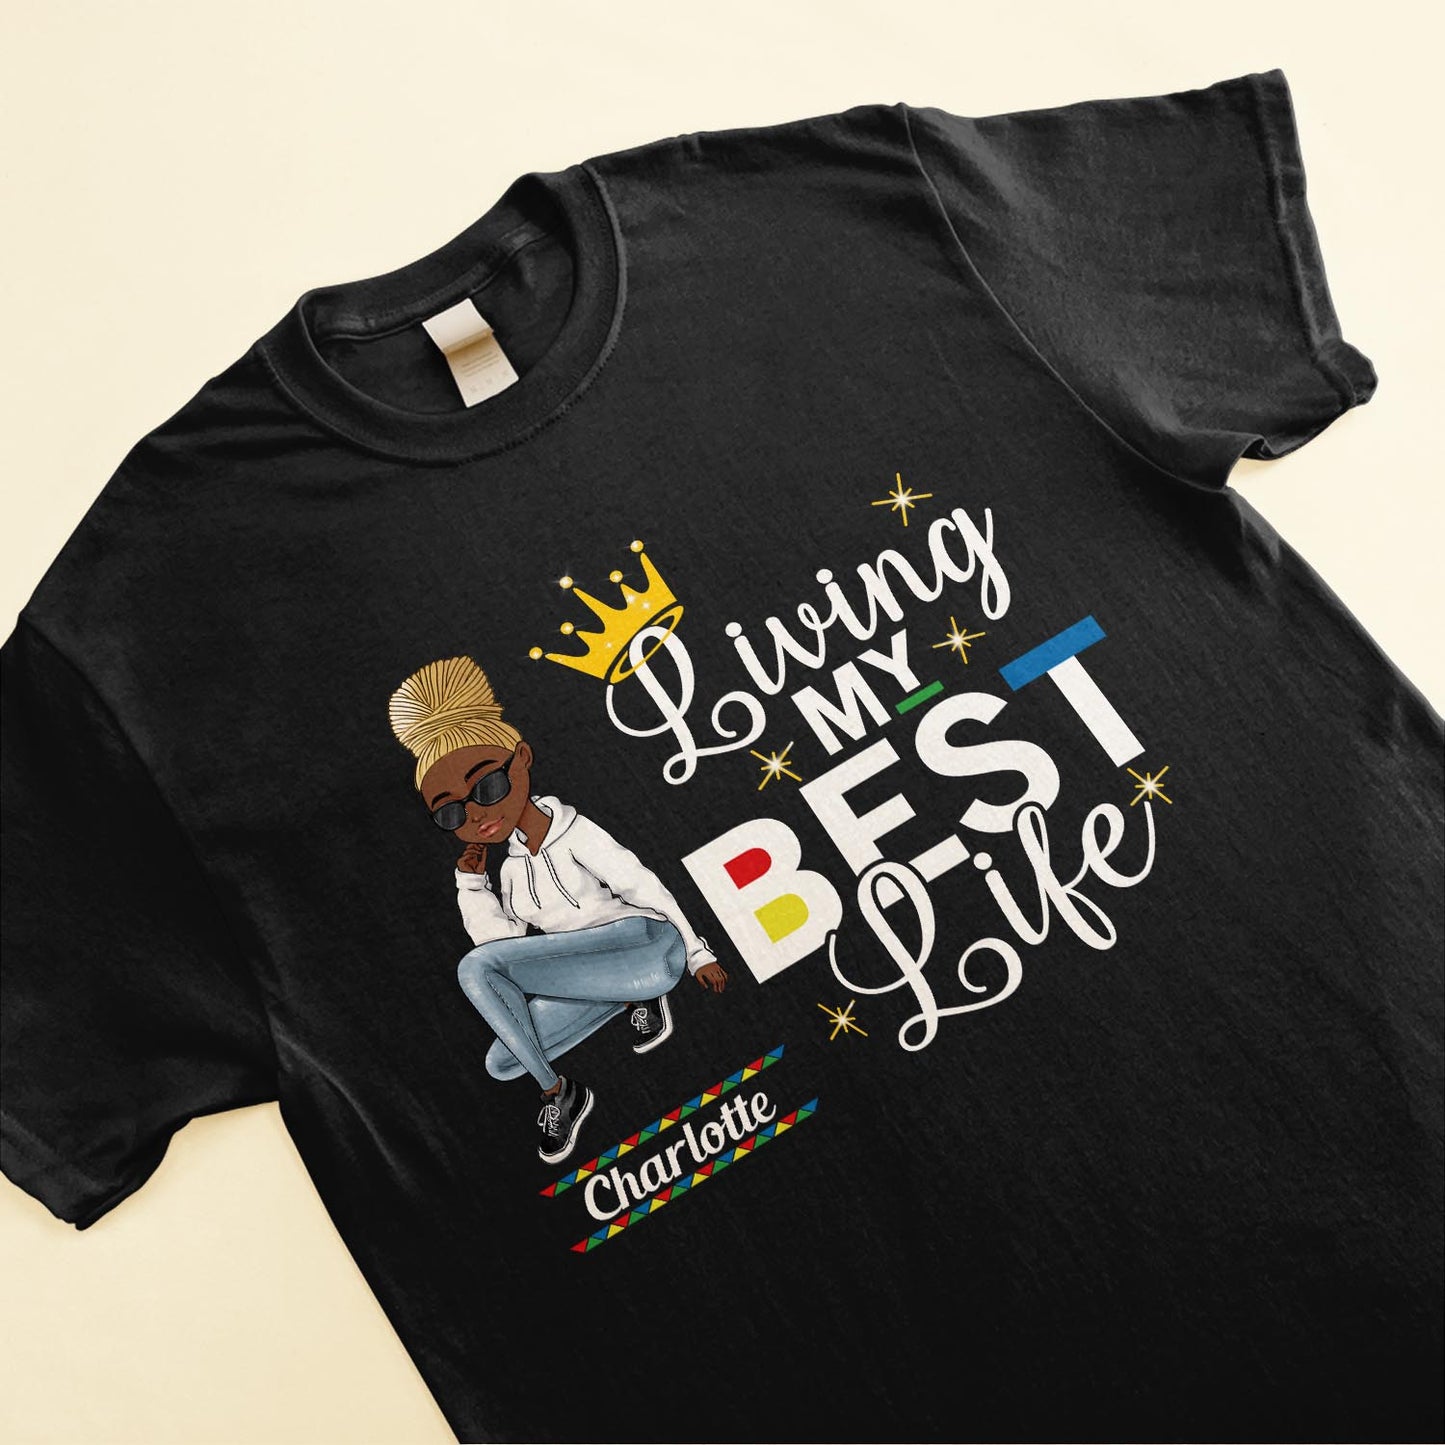 Living My Best Life  - Personalized Shirt - Birthday Gift For Sista, Black Woman - Sassy Girls